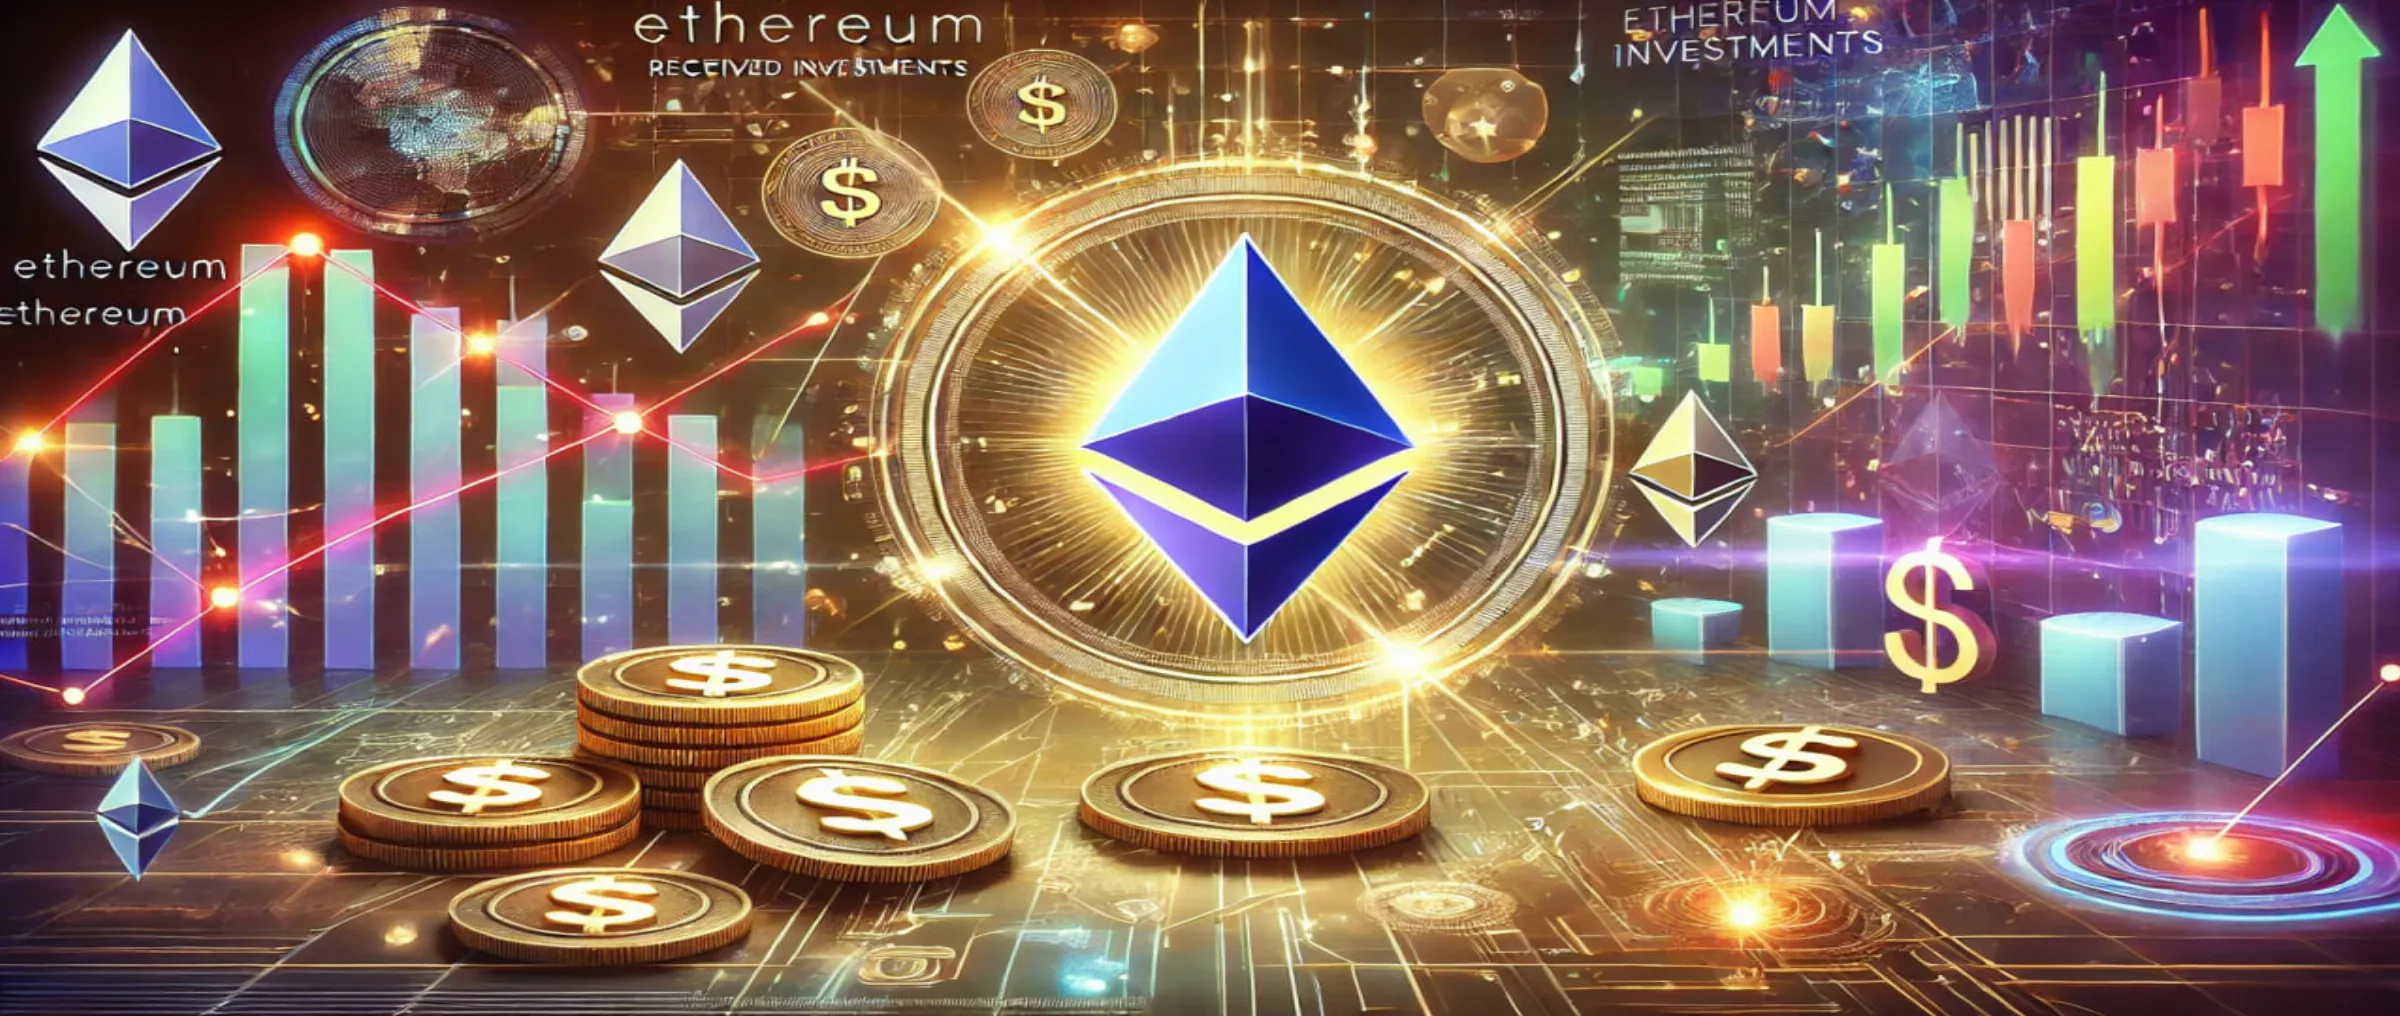 Institutional investors invested $13.2 million in Ethereum over the week